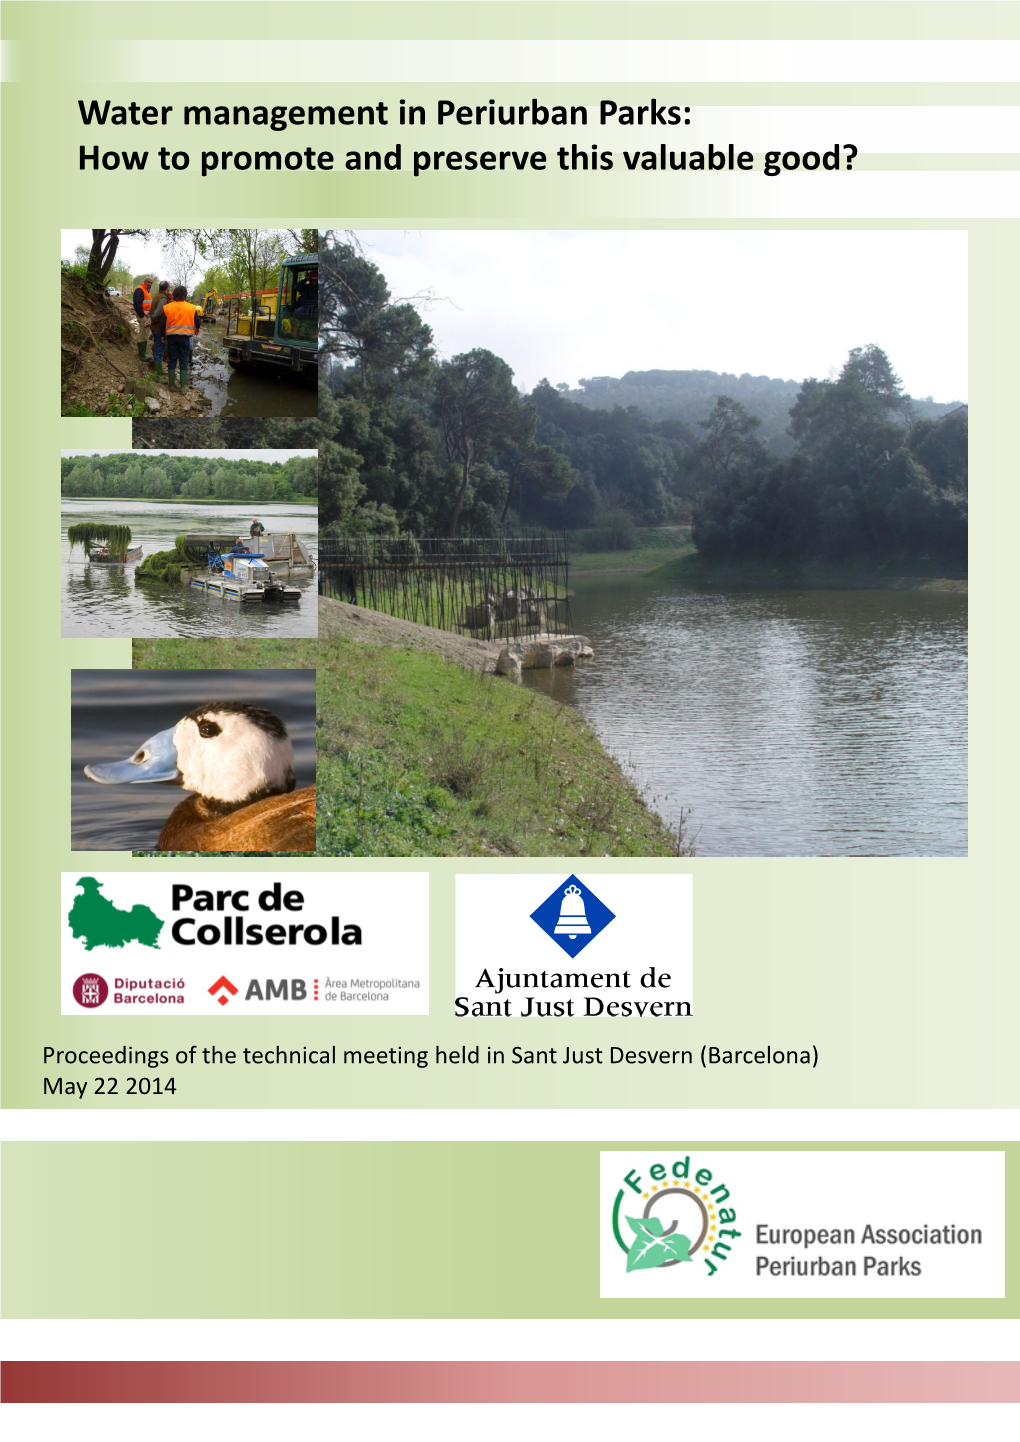 Water Management in Periurban Parks: How to Promote and Preserve This Valuable Good?